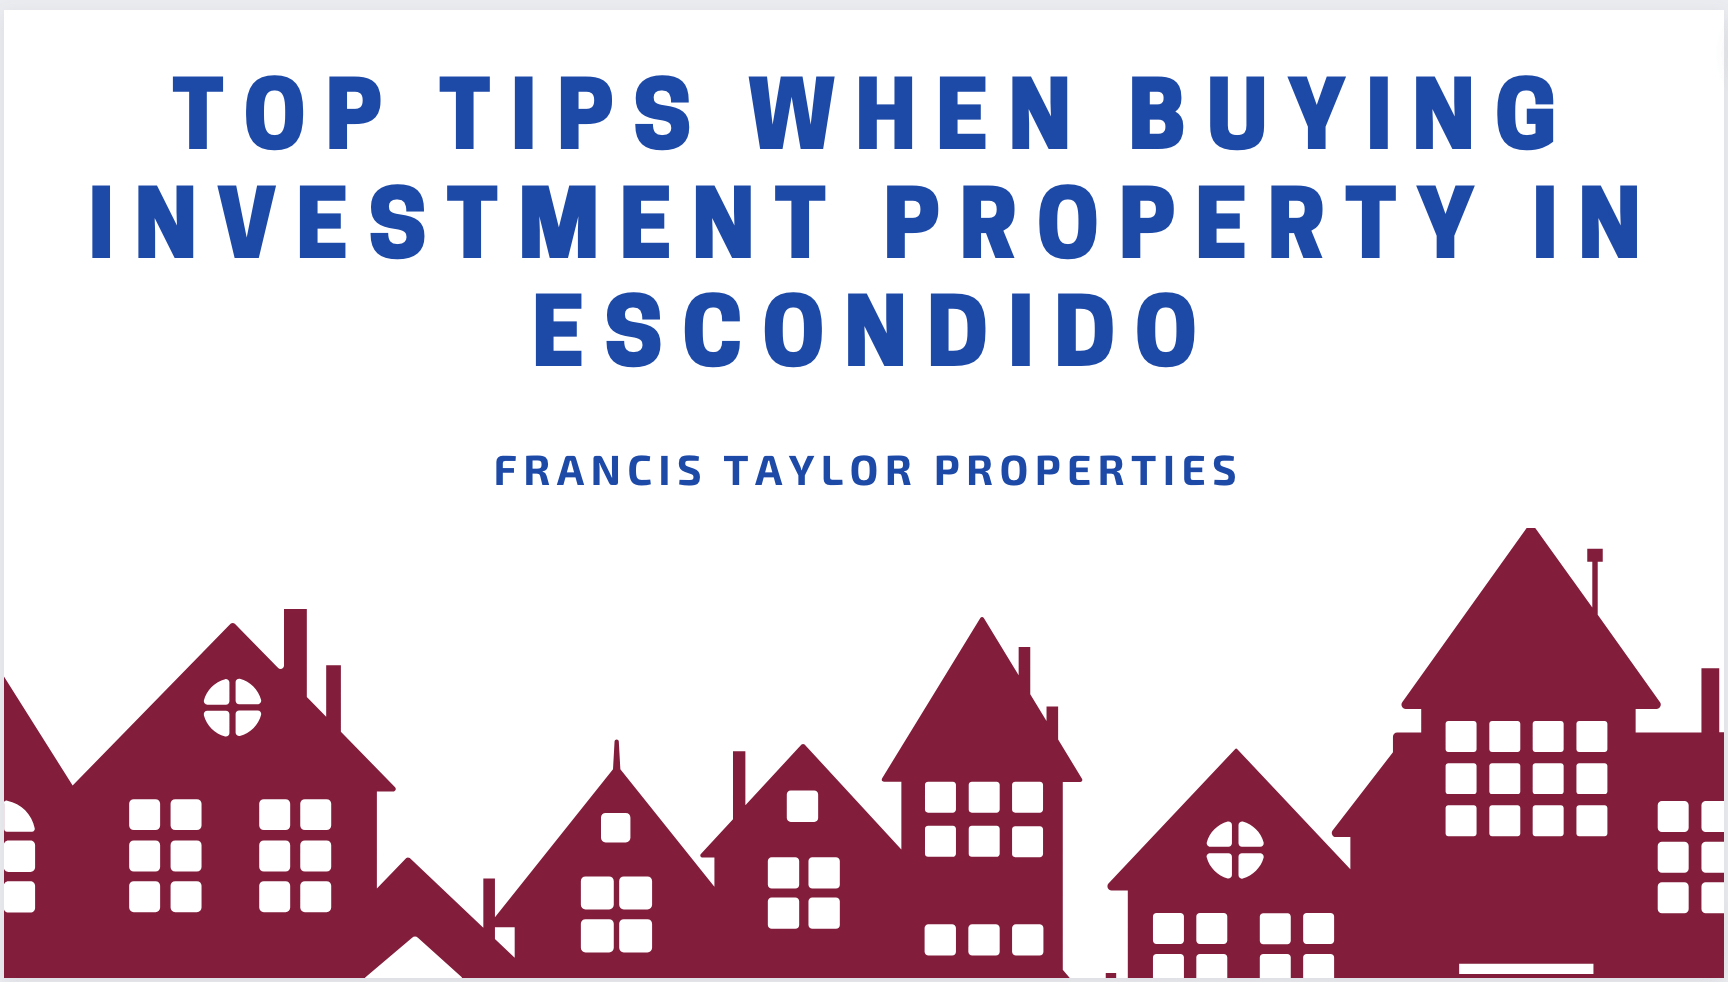 Top Tips When Buying Investment Property in Escondido